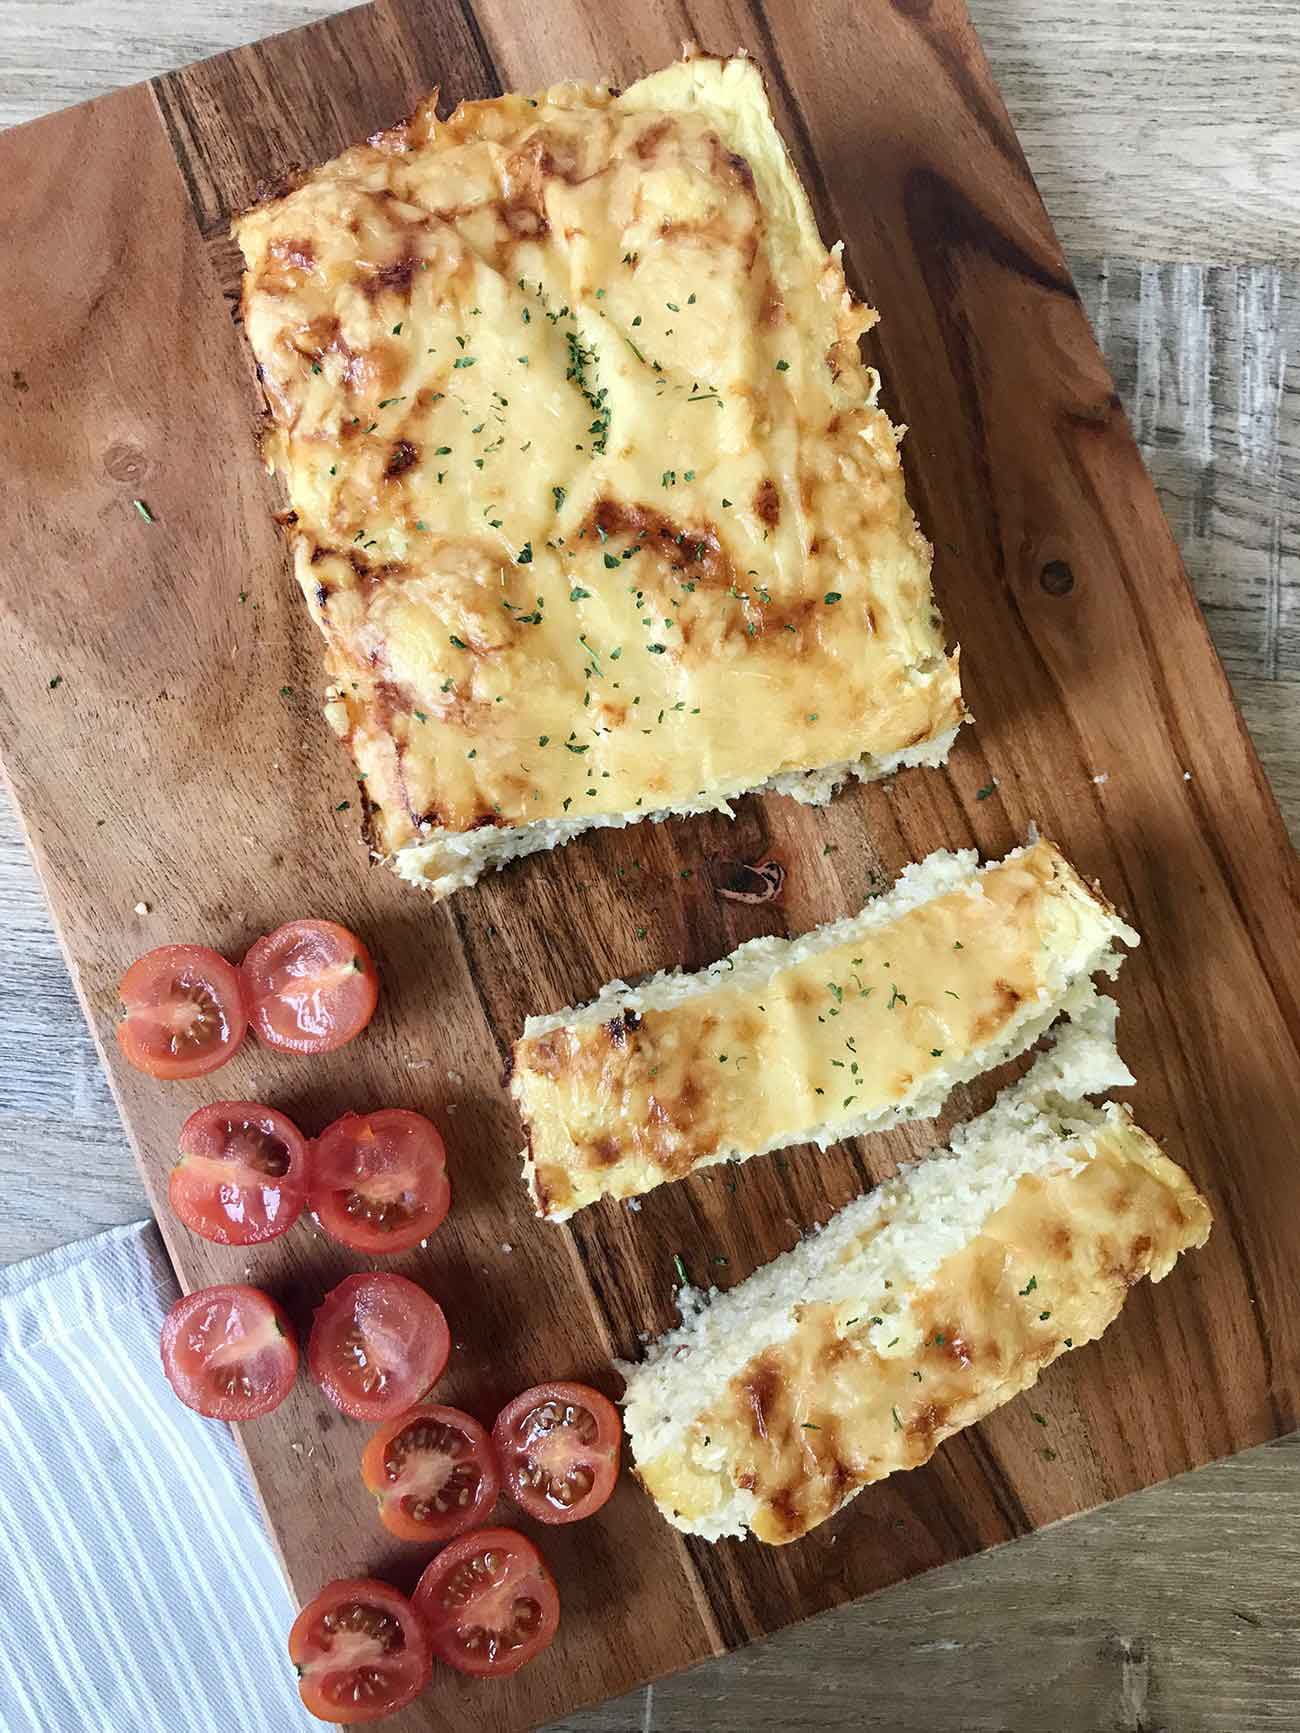 Cauliflower cheese bread and some tomatoes.